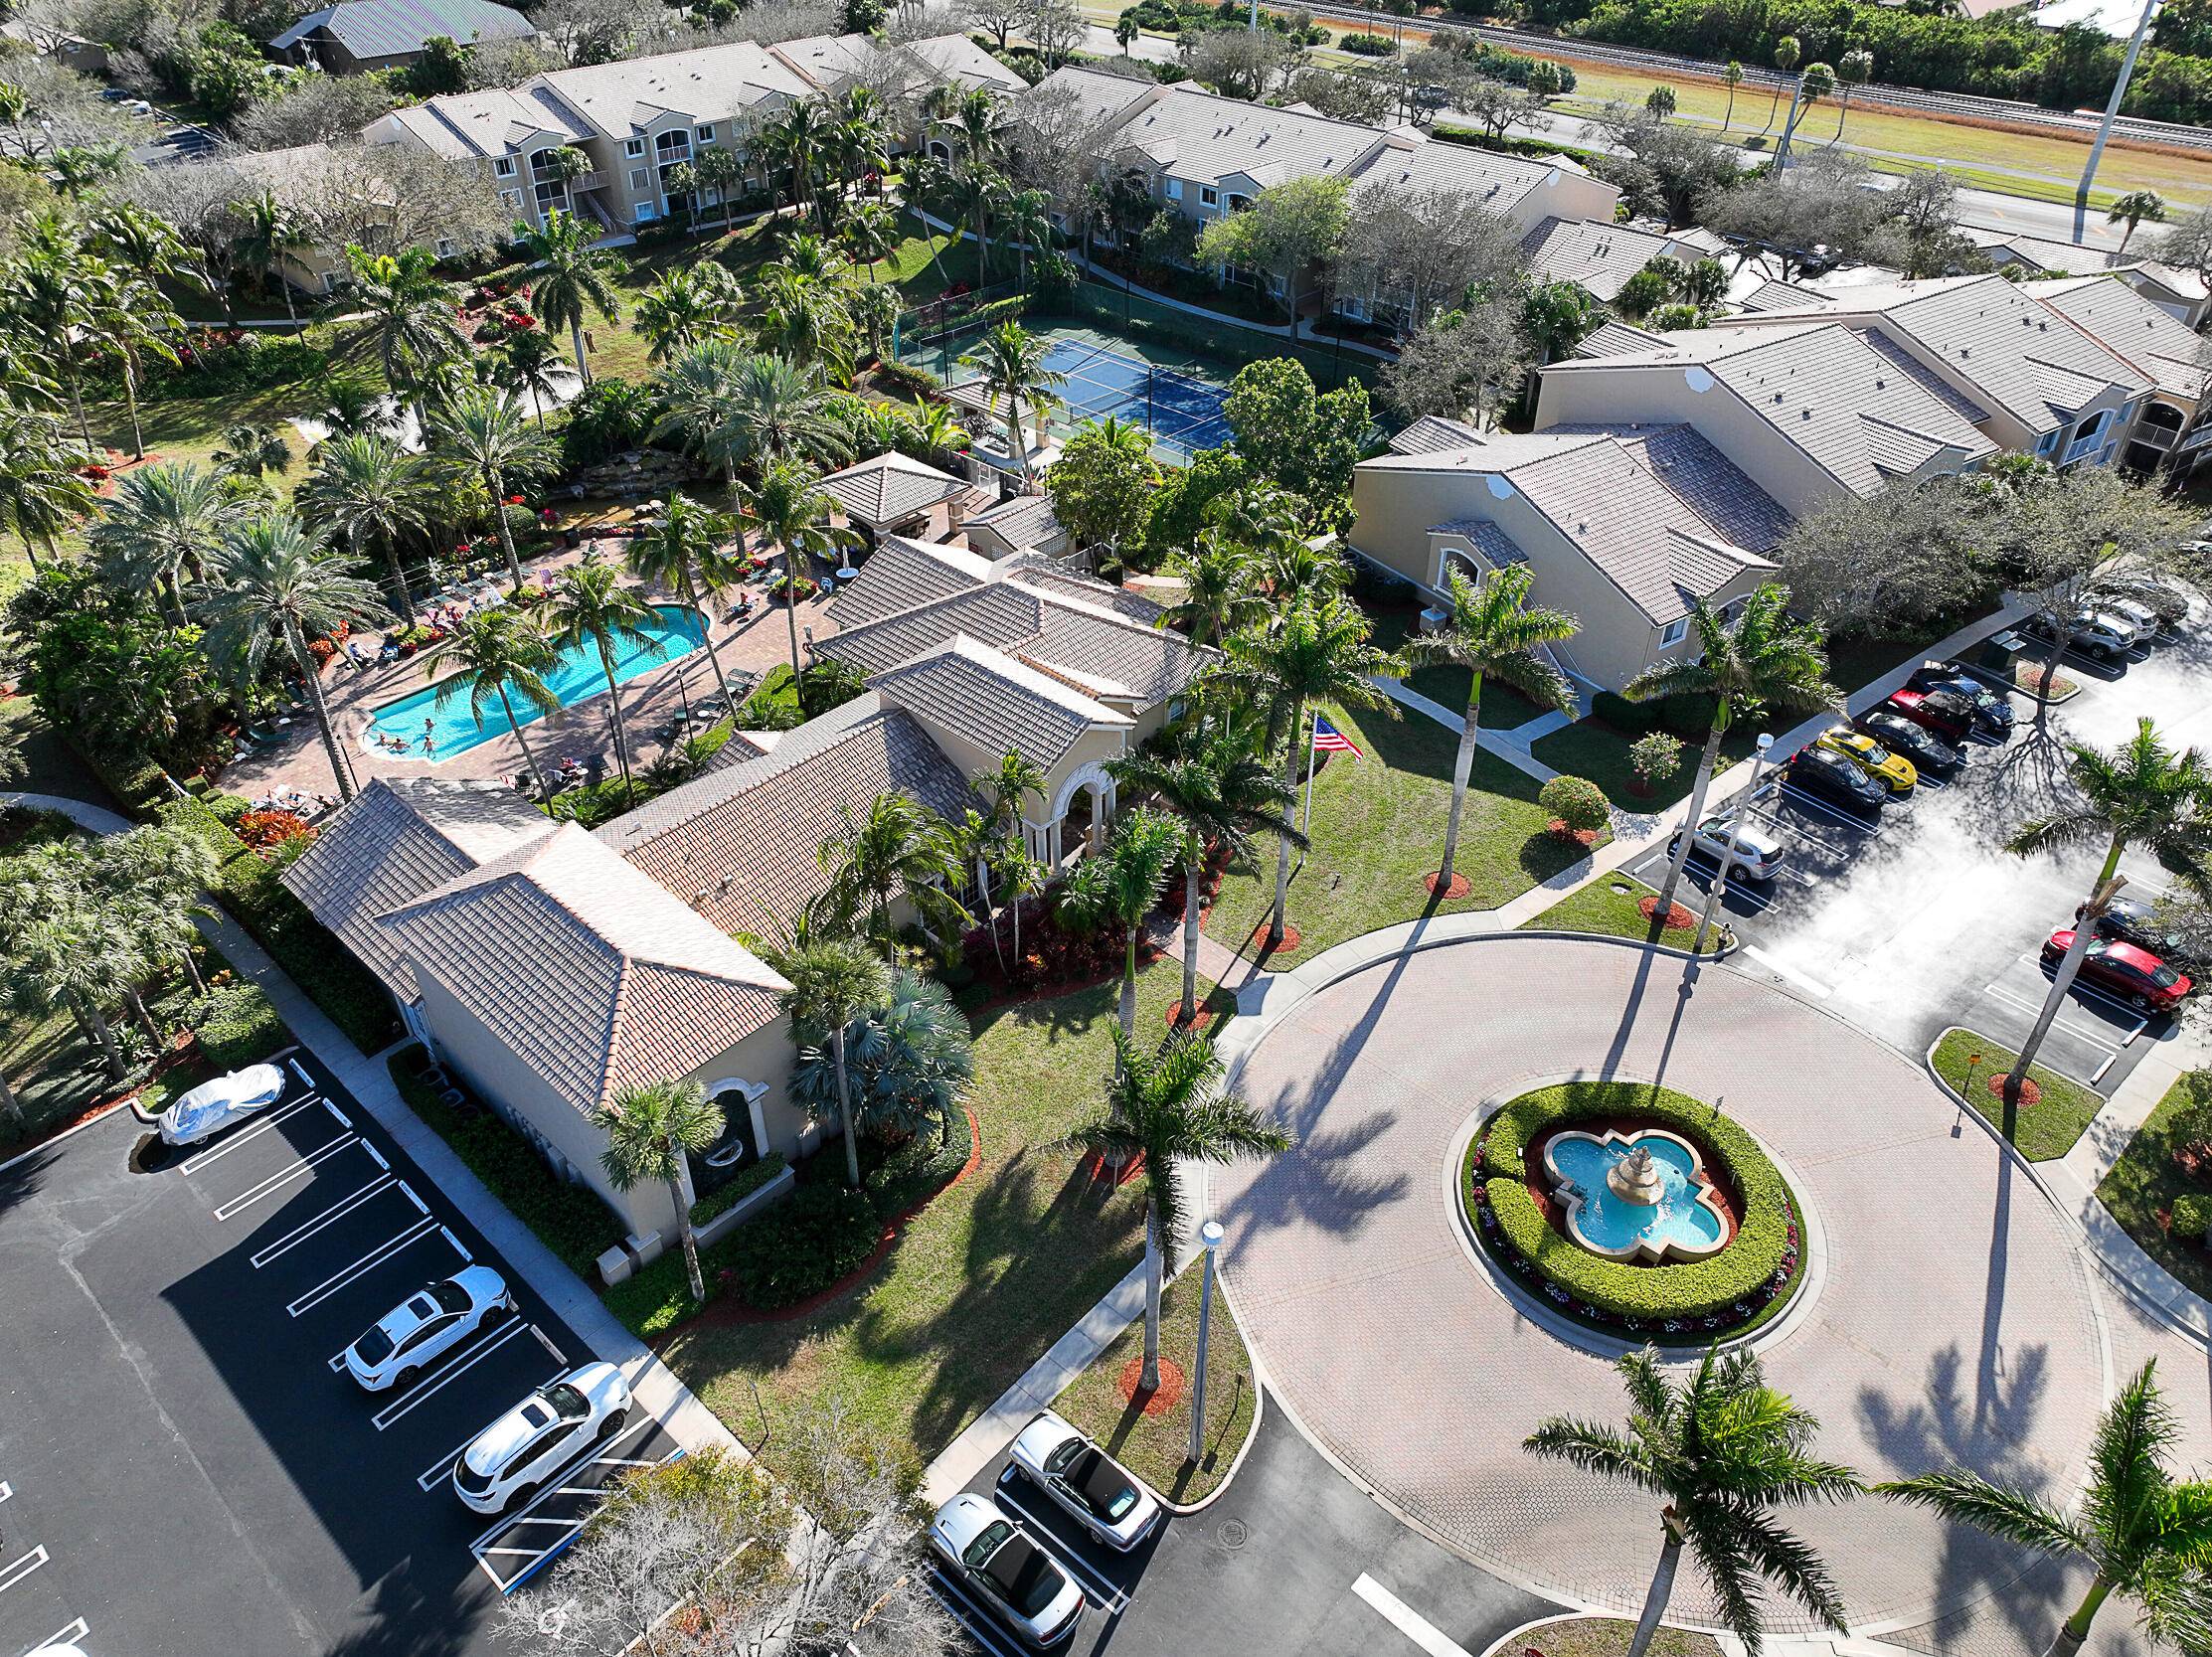 PRIME LOCATION ! Lighthouse Cove is a beautiful condo community close to the beach has lush resort style grounds in Tequesta.